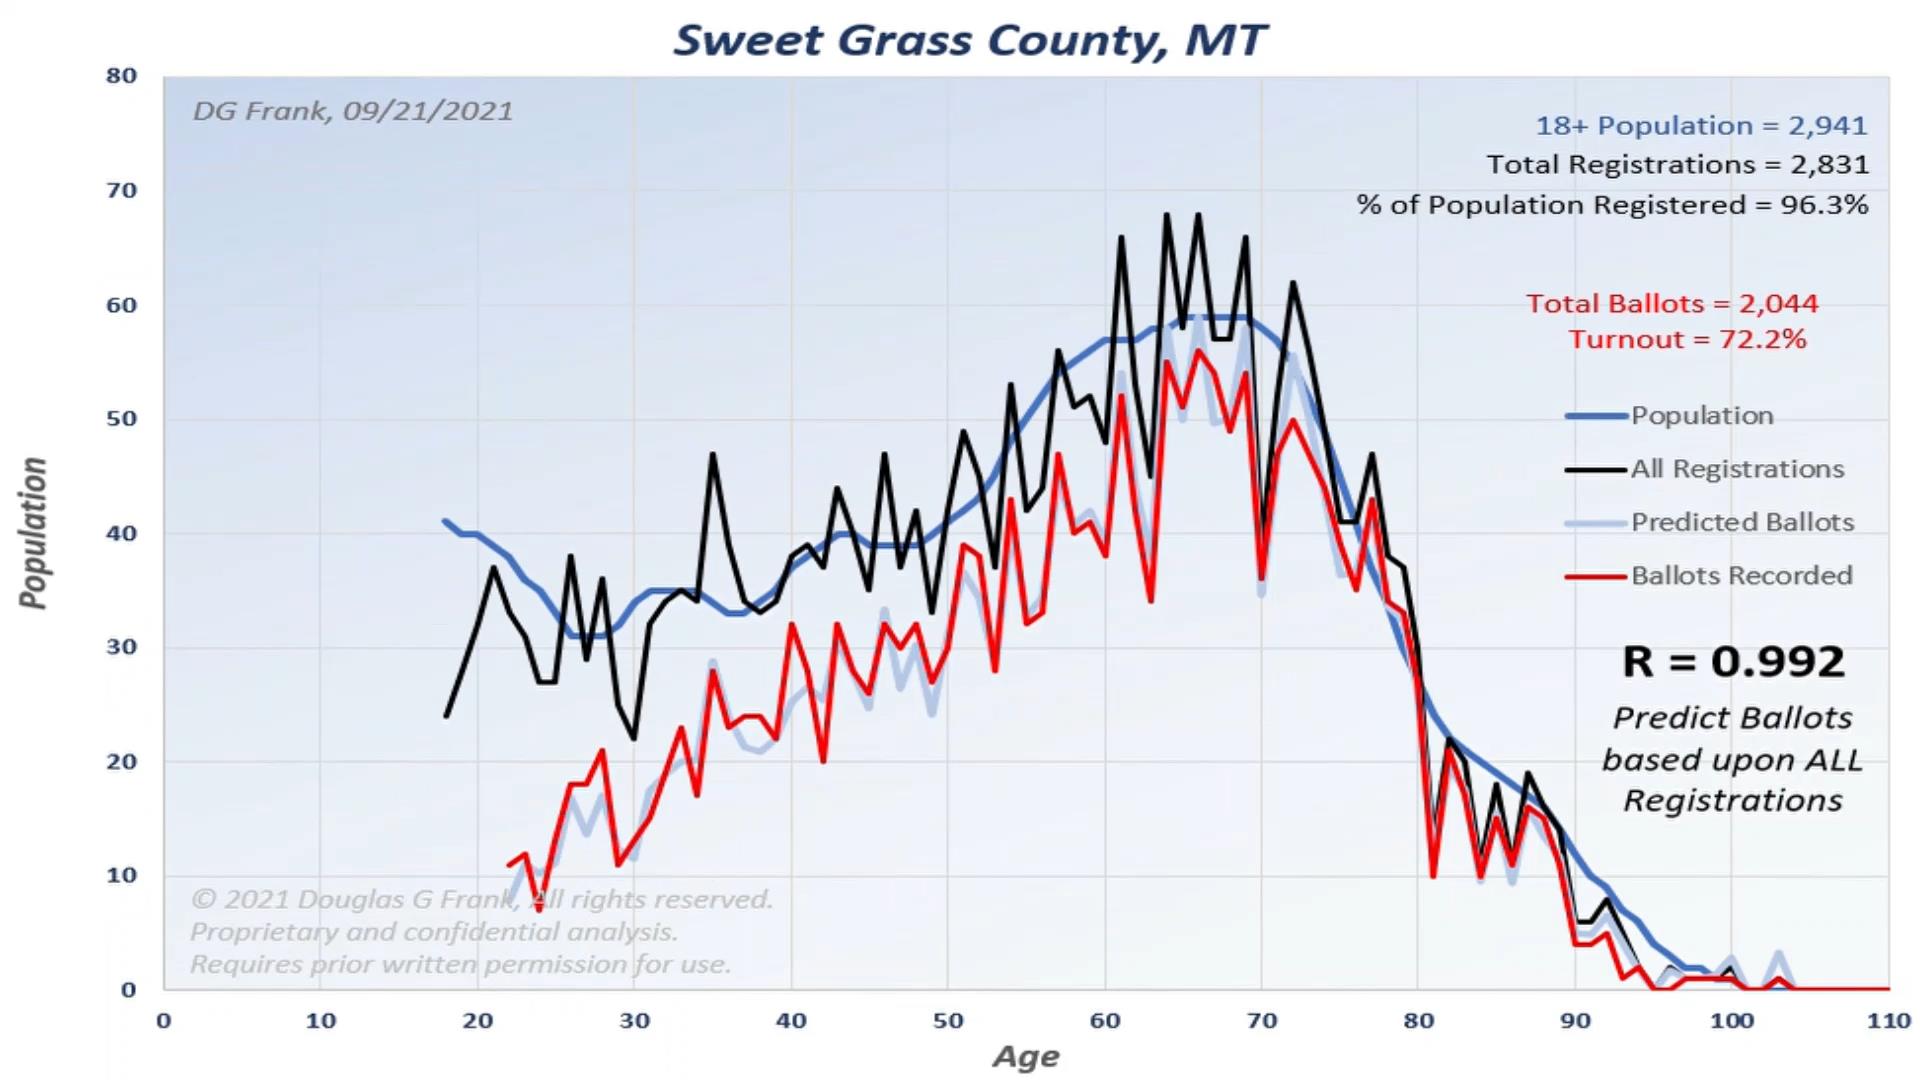 Sweet Grass County 2020 Election Analysis Chart by Dr. Doug Frank